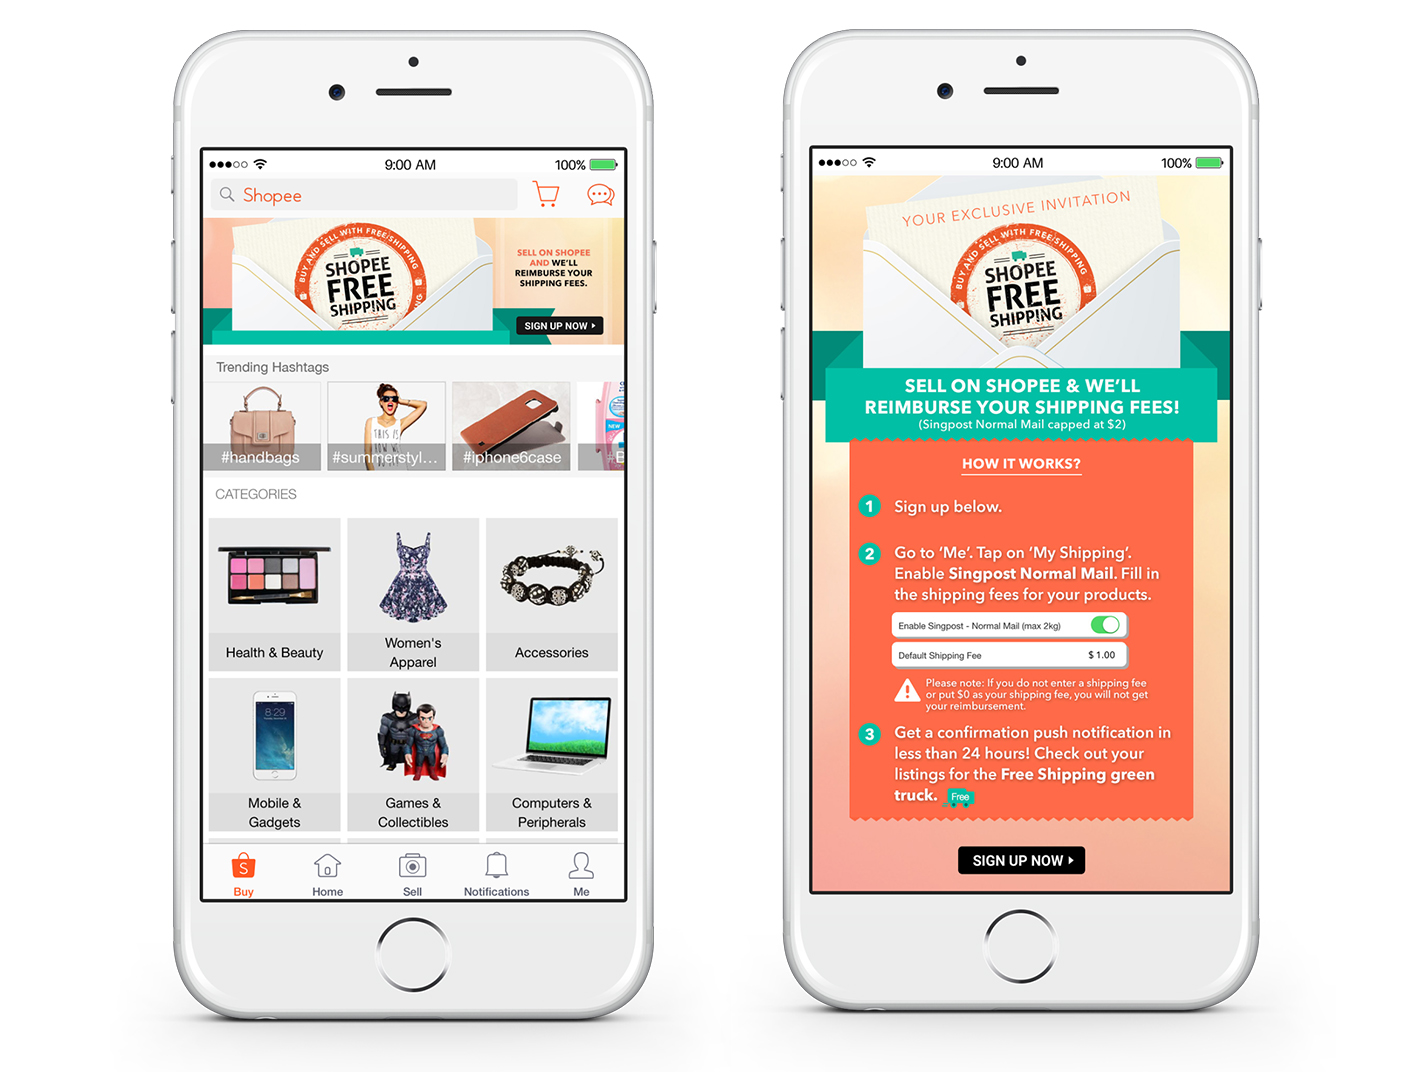 This Singapore-based startup officially launched its mobile-first online marketplace in 2015, where people can buy and sell stuff just using their smartphone. Shopee is part of Singapore-founded internet and social platform Garena’s ecosystem of apps © The Smart Local